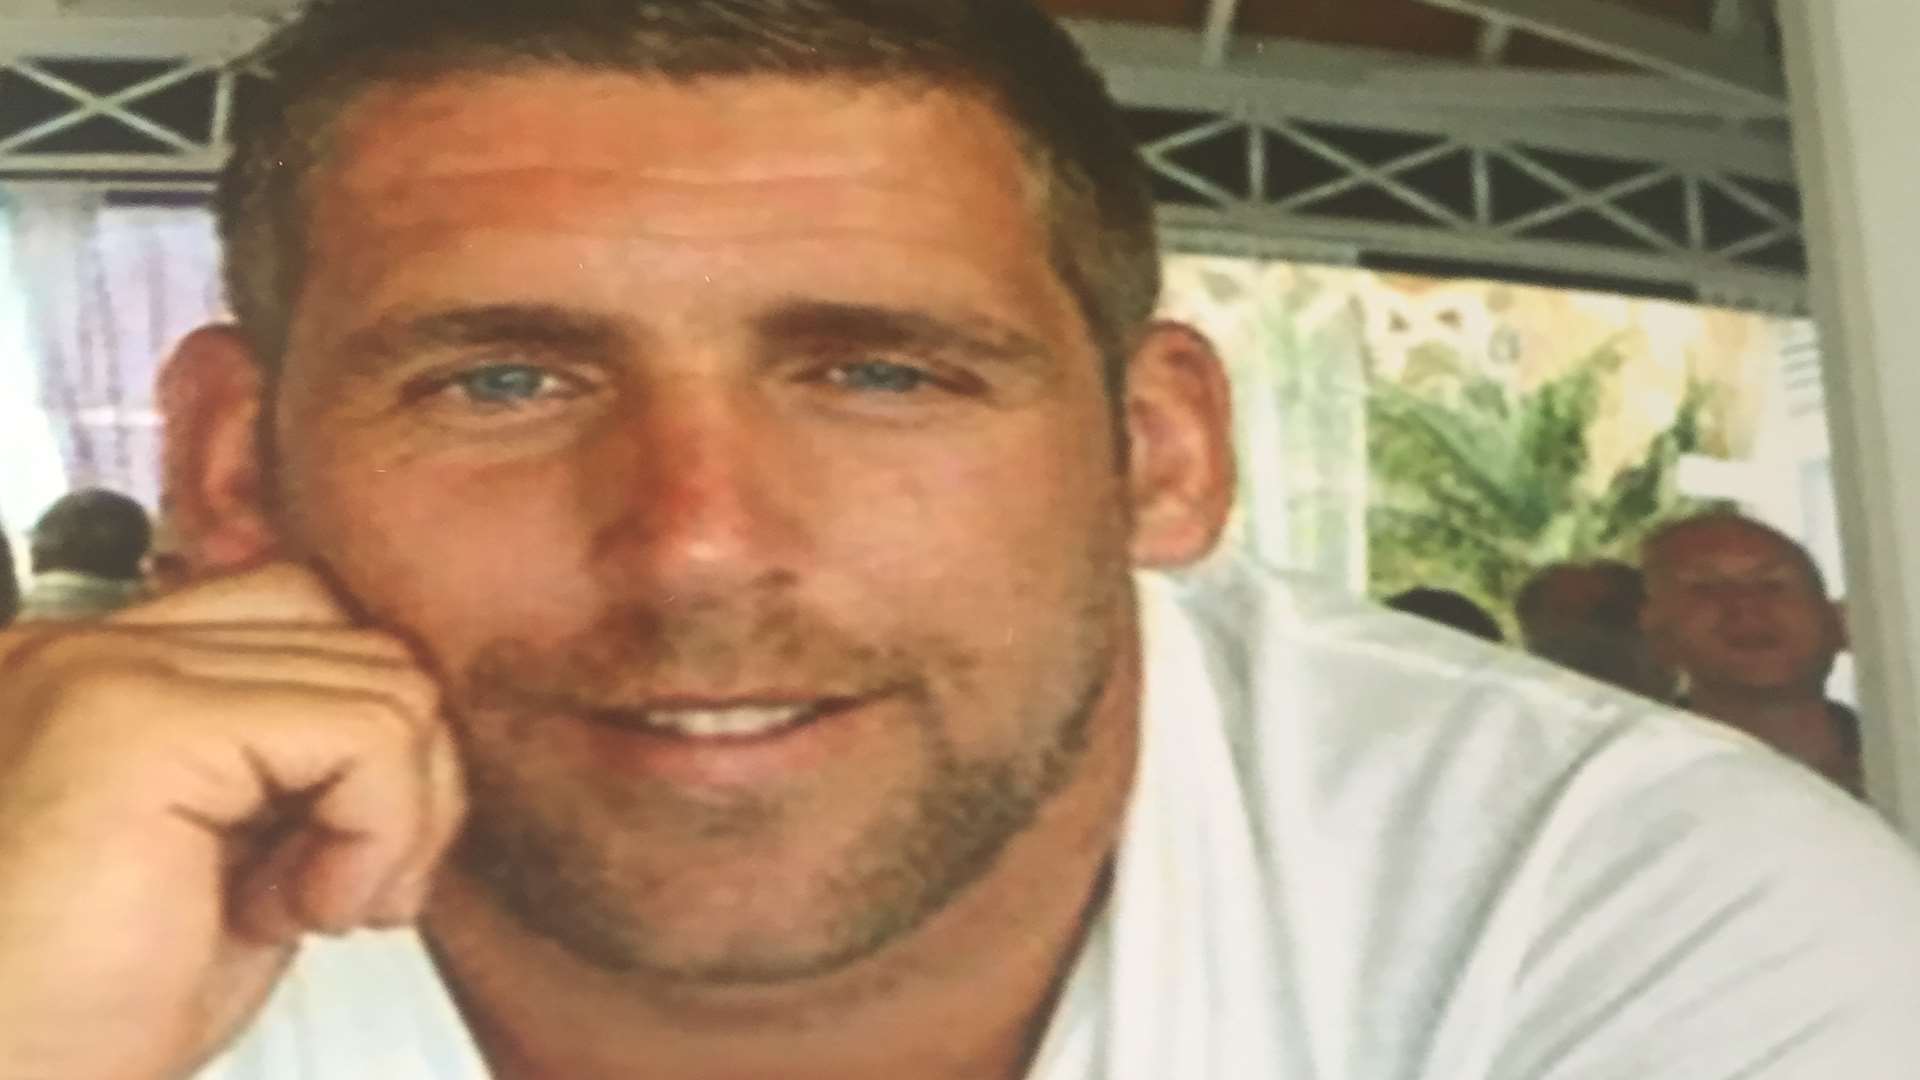 Shaun Tandy from Chatham who died in tragic work accident